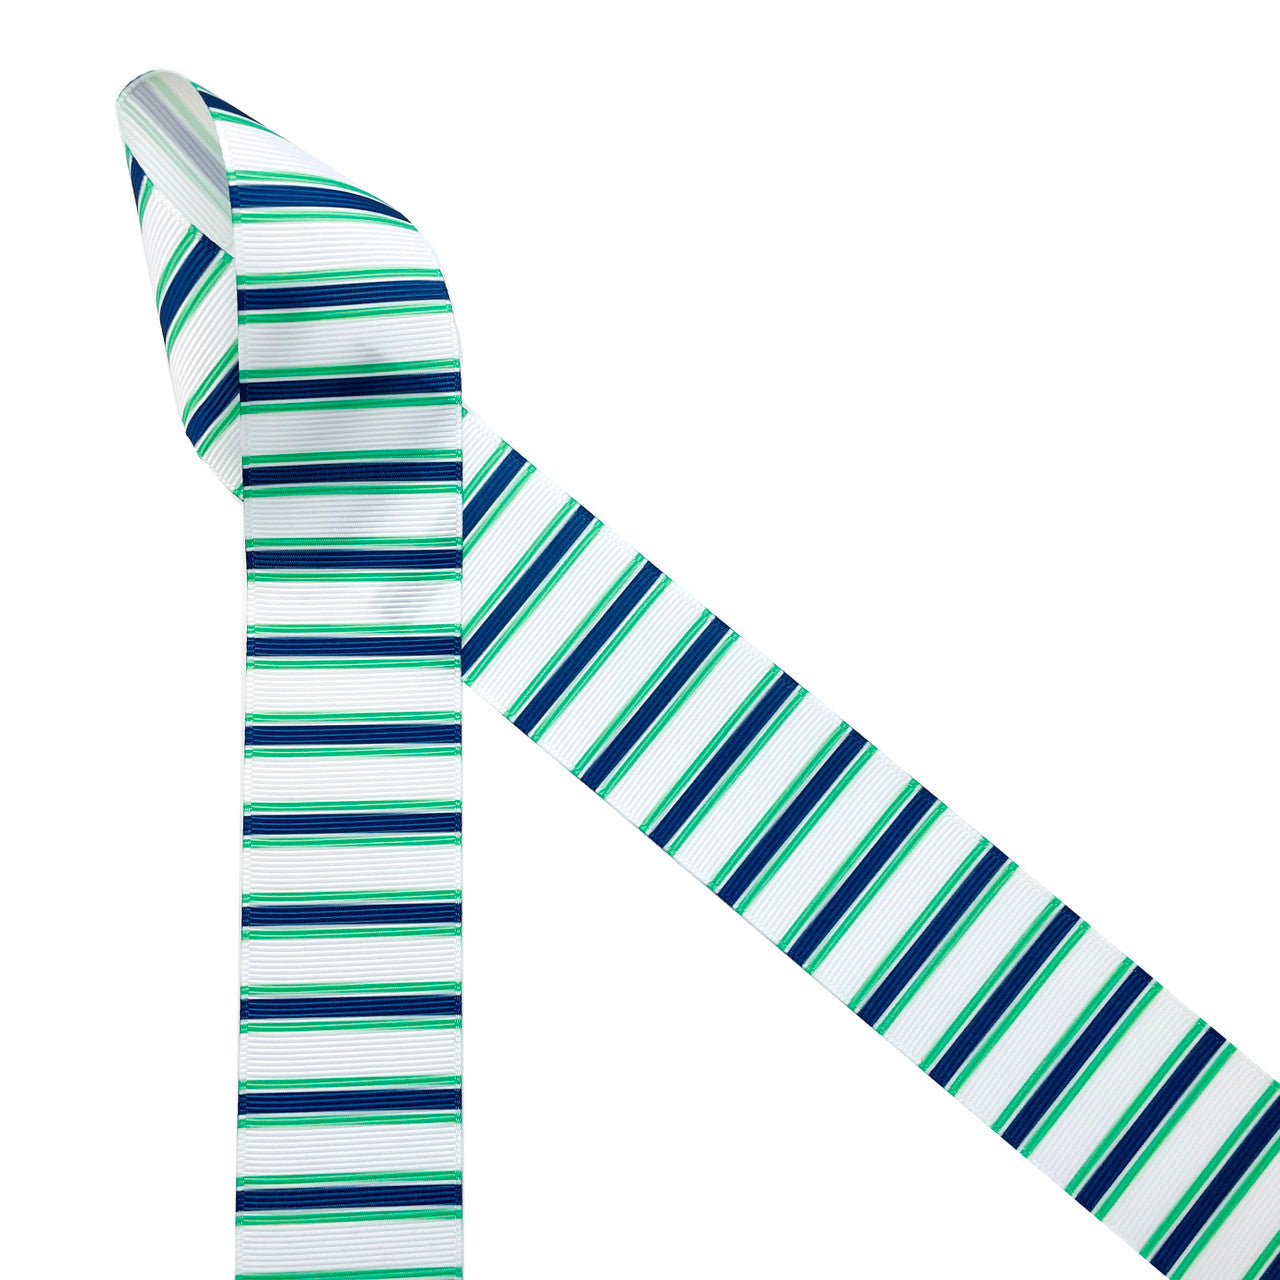 Stripes of blue and green printed on 1.5" white grosgrain ribbon is the ideal ribbon for preppy bows! This is a fun ribbon for preppy party decor, seaside party decor. beach themed parties, hair bows, headbands and hat bands! A fun ribbon for gift wrap, quilting and sewing crafts too! All our ribbon is designed and printed in the USA